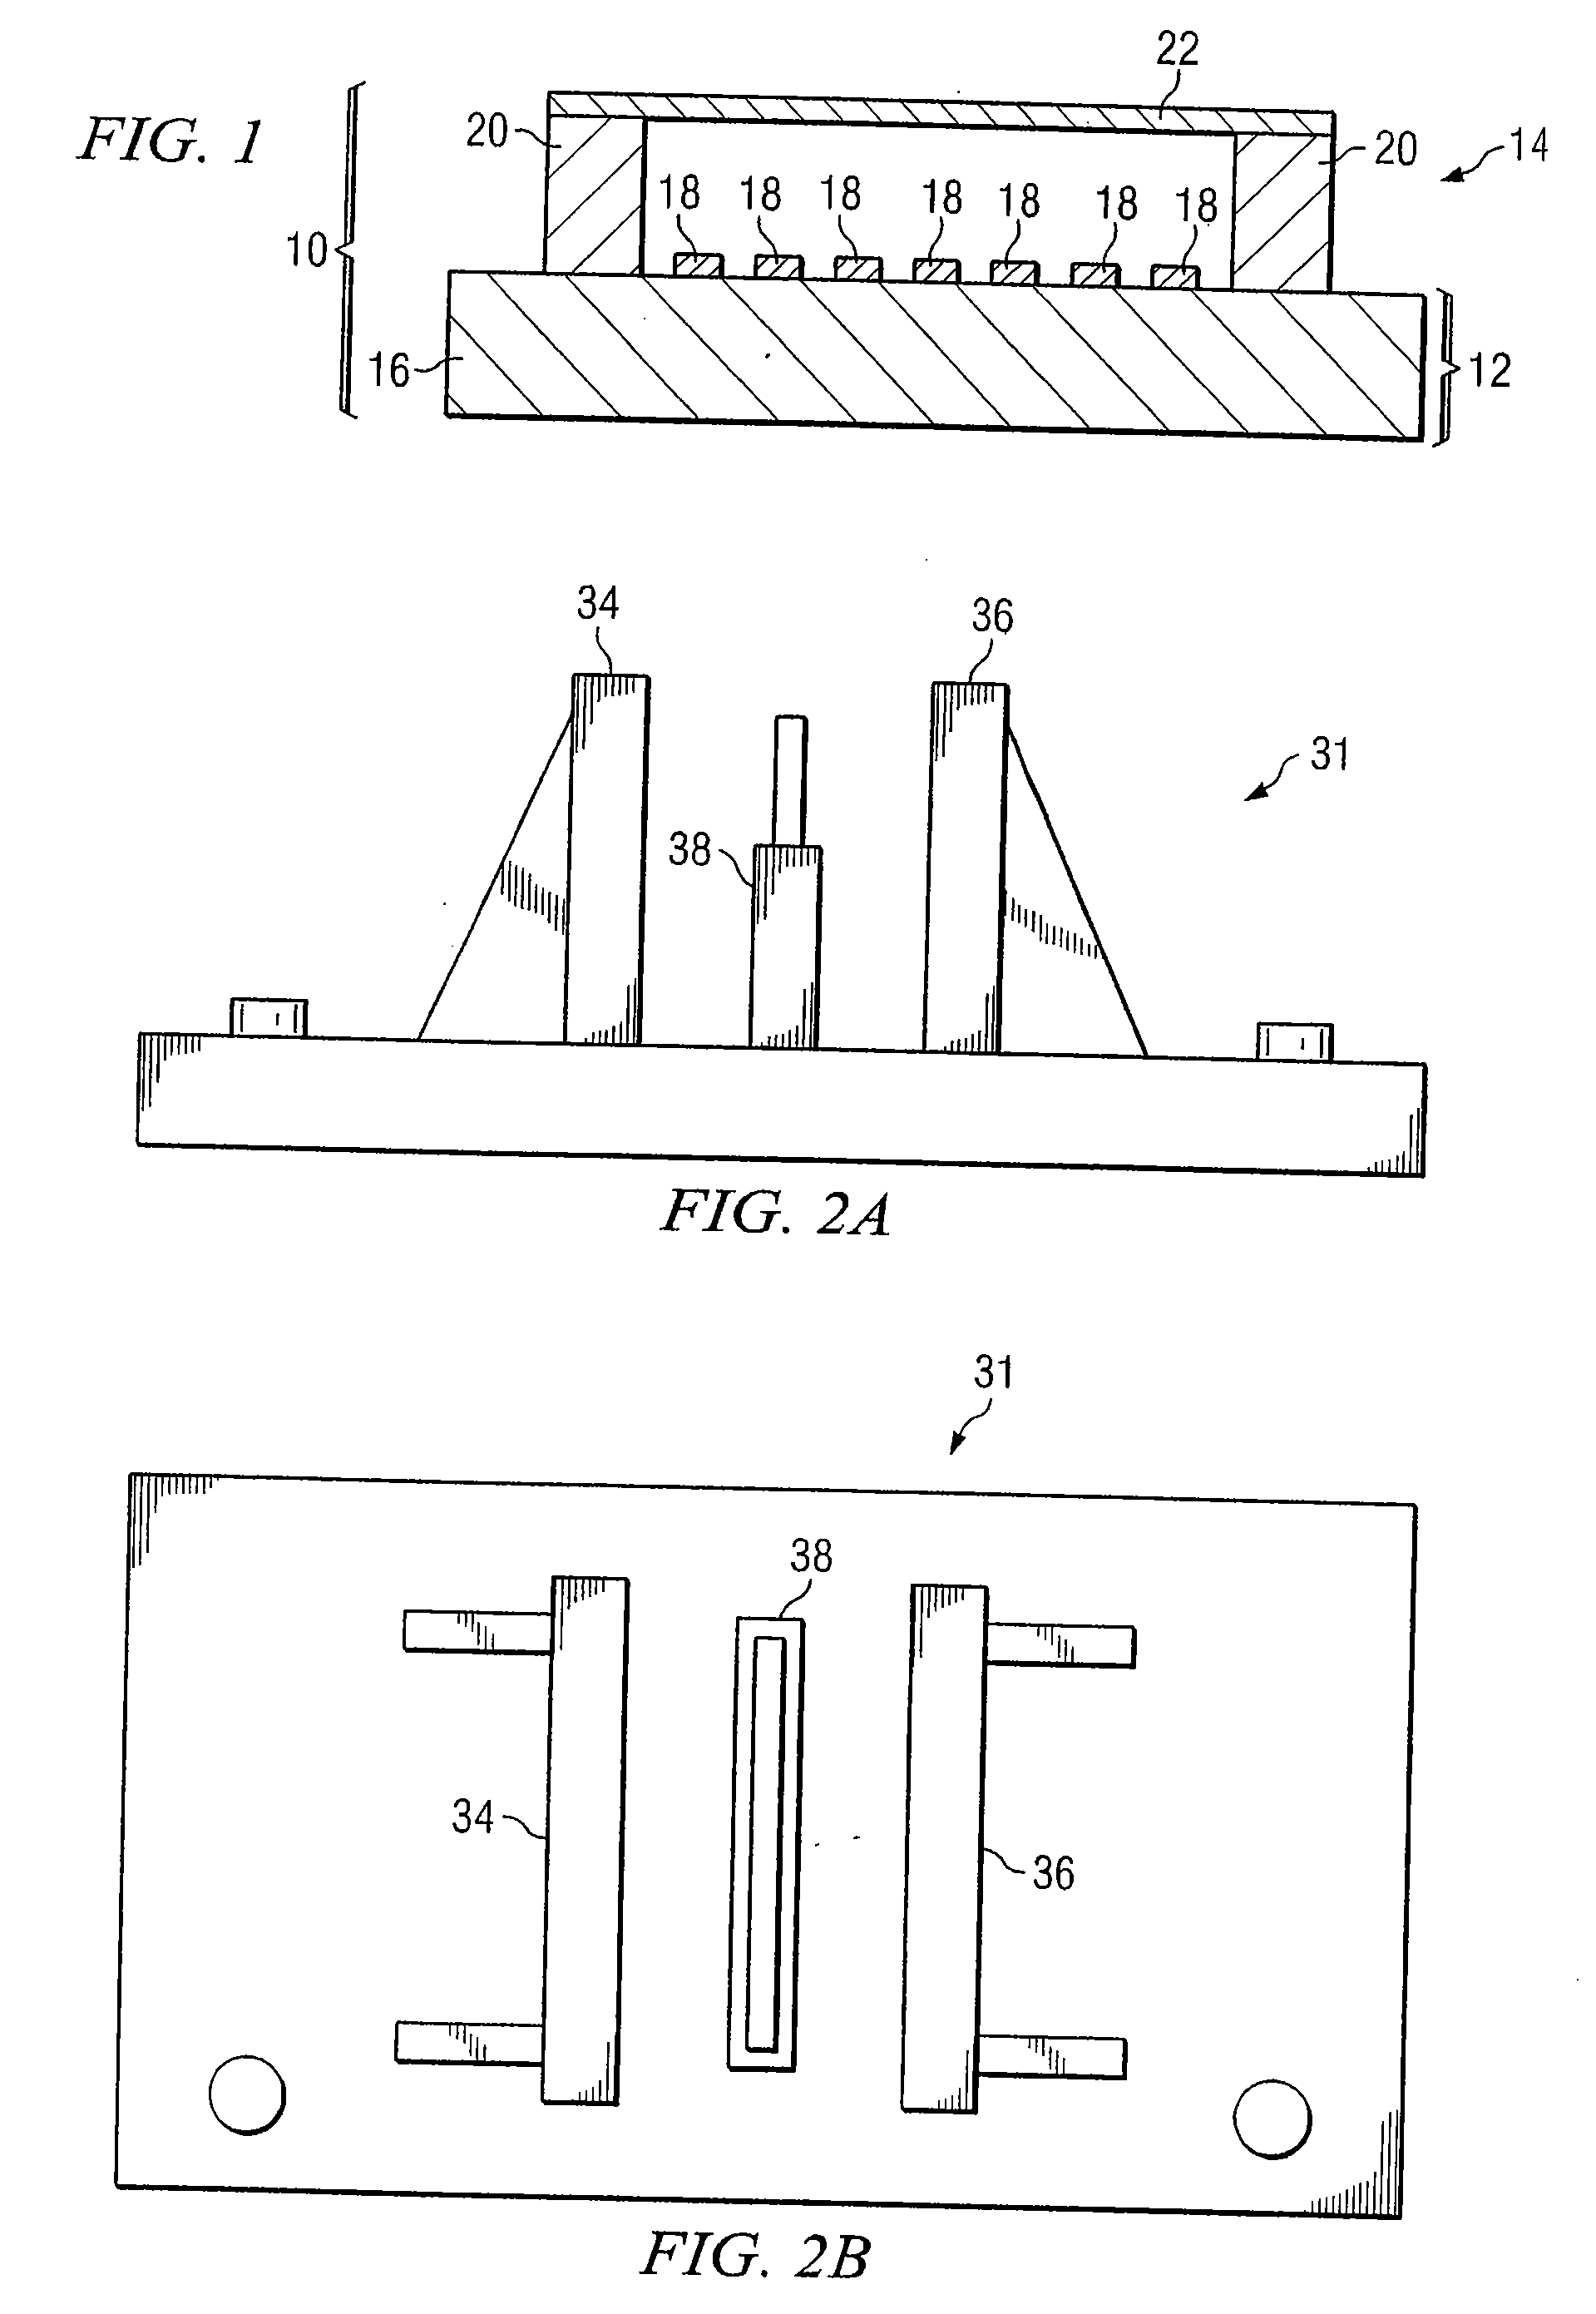 System and Method for Automatically Mounting a Pellicle Assembly on a Photomask